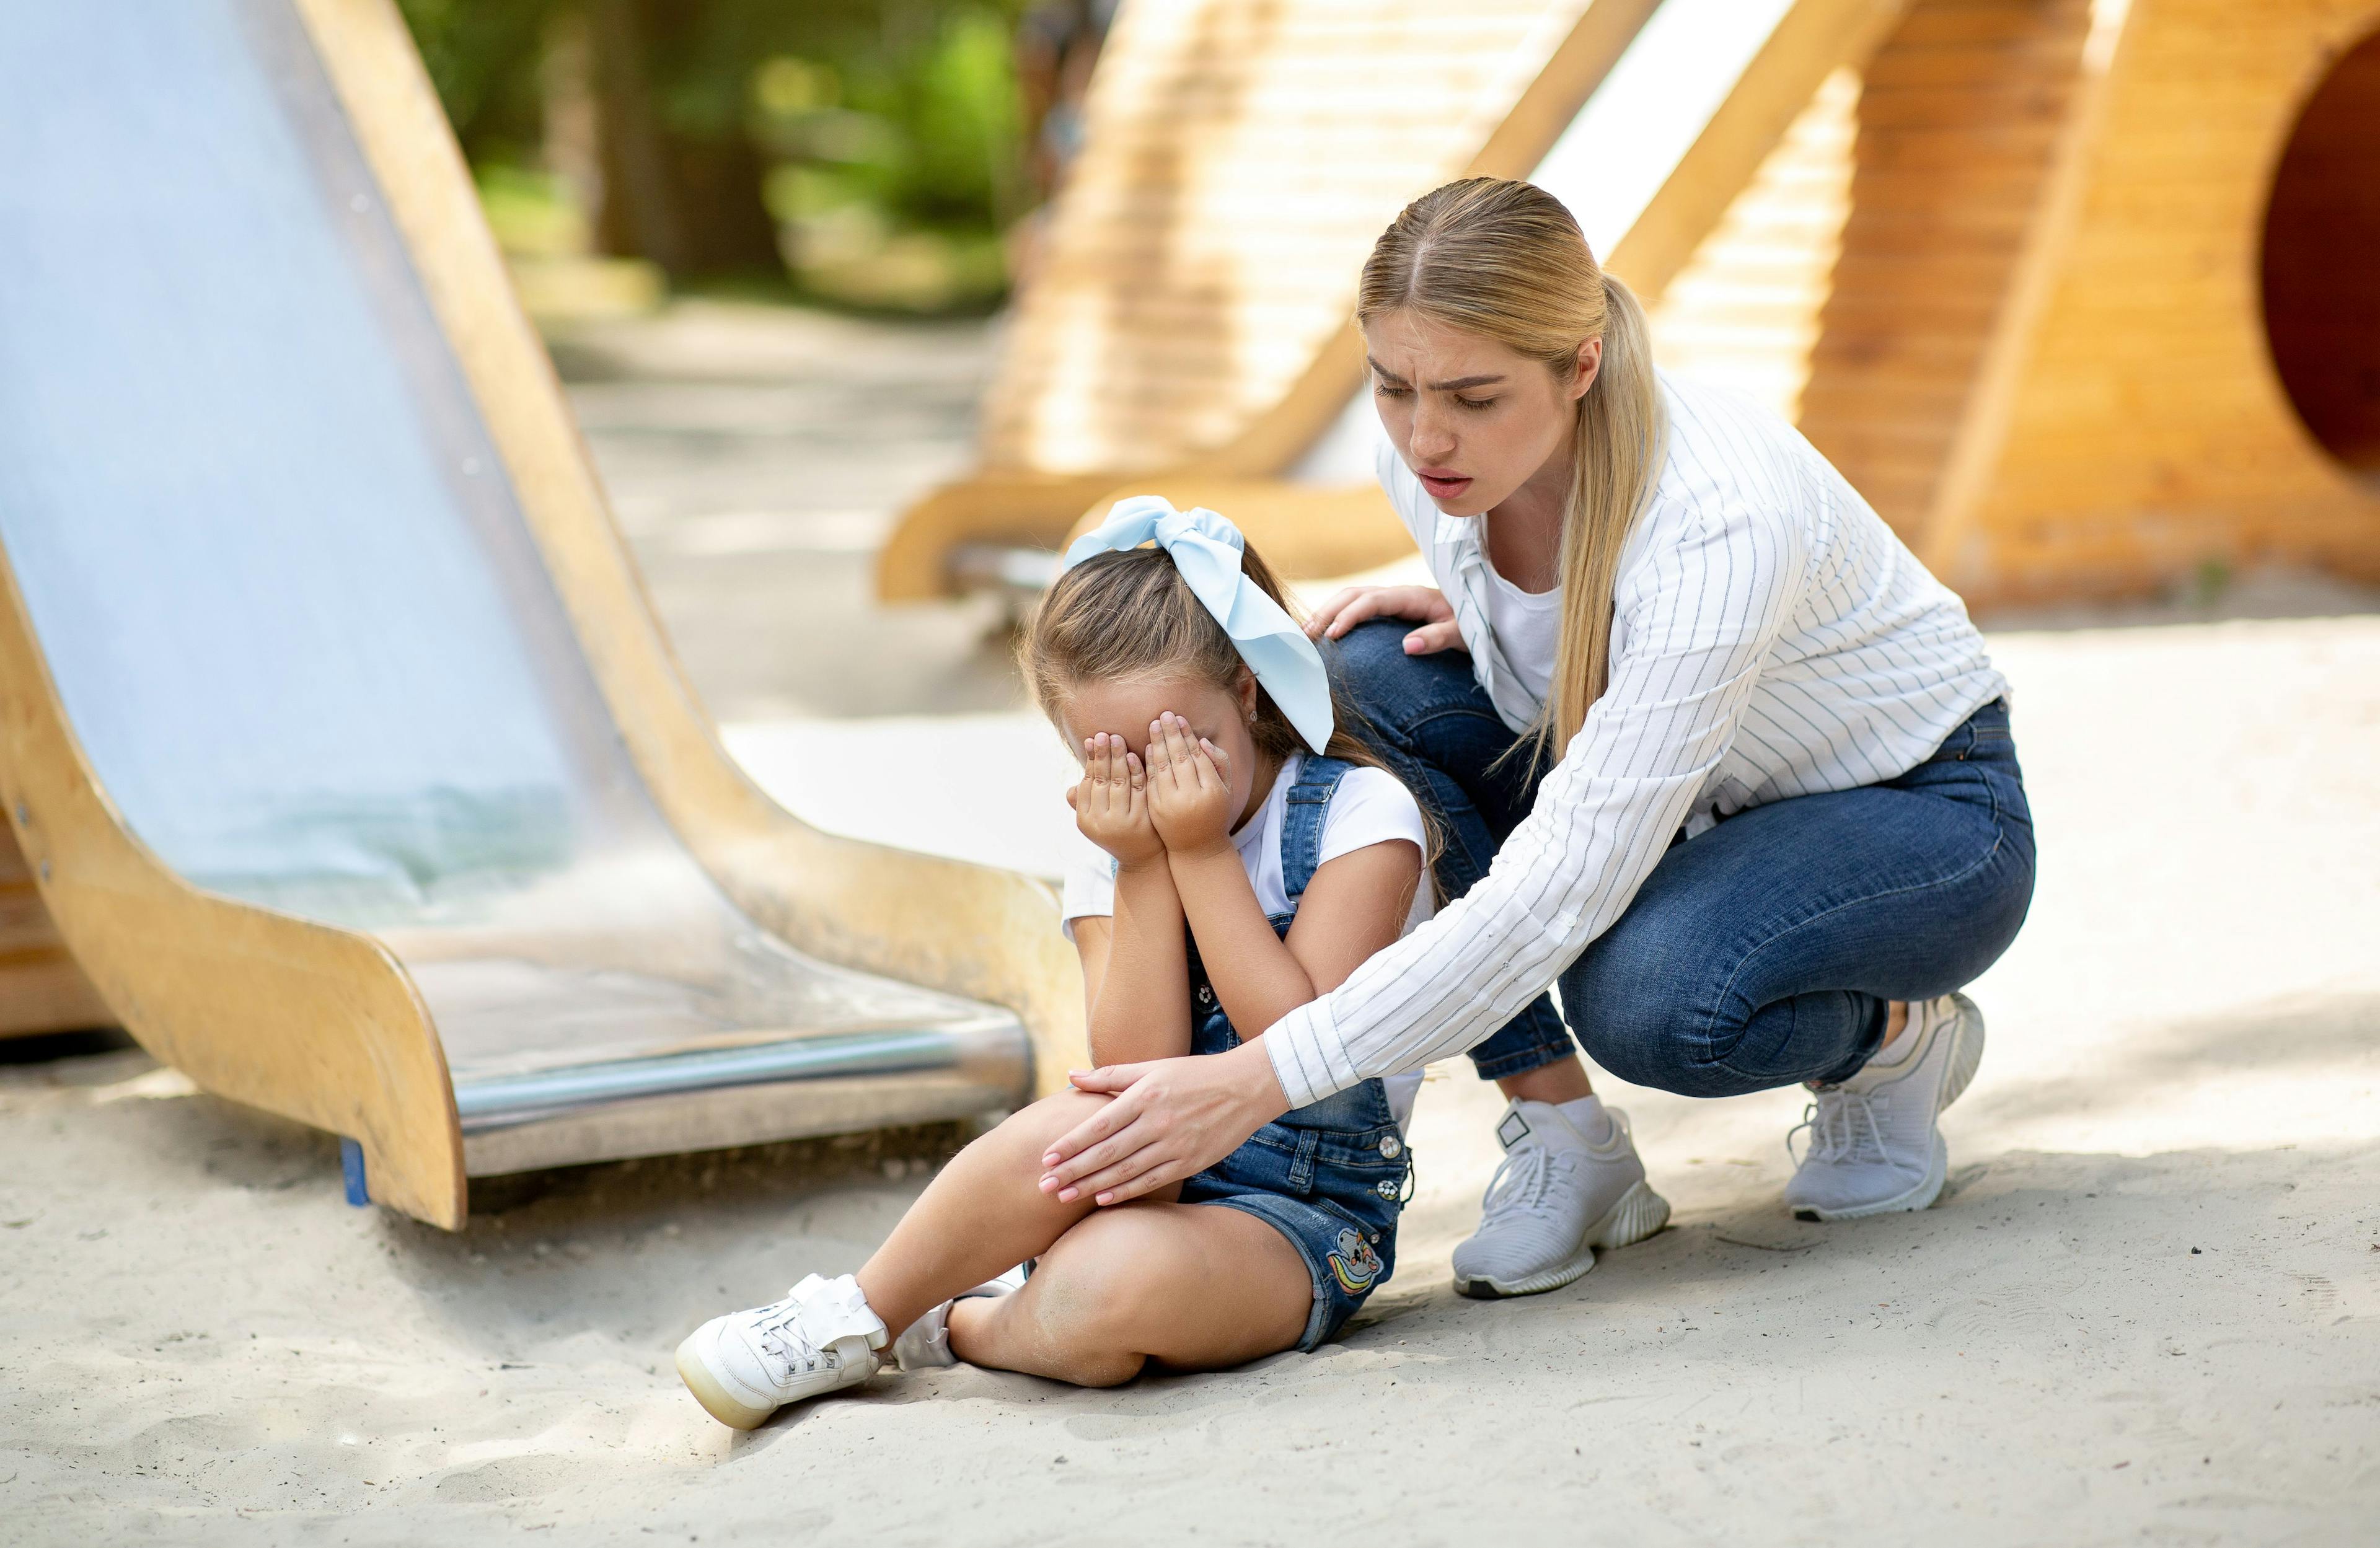 Related to Playground Injuries: Liability of Property Owners and Equipment Safety